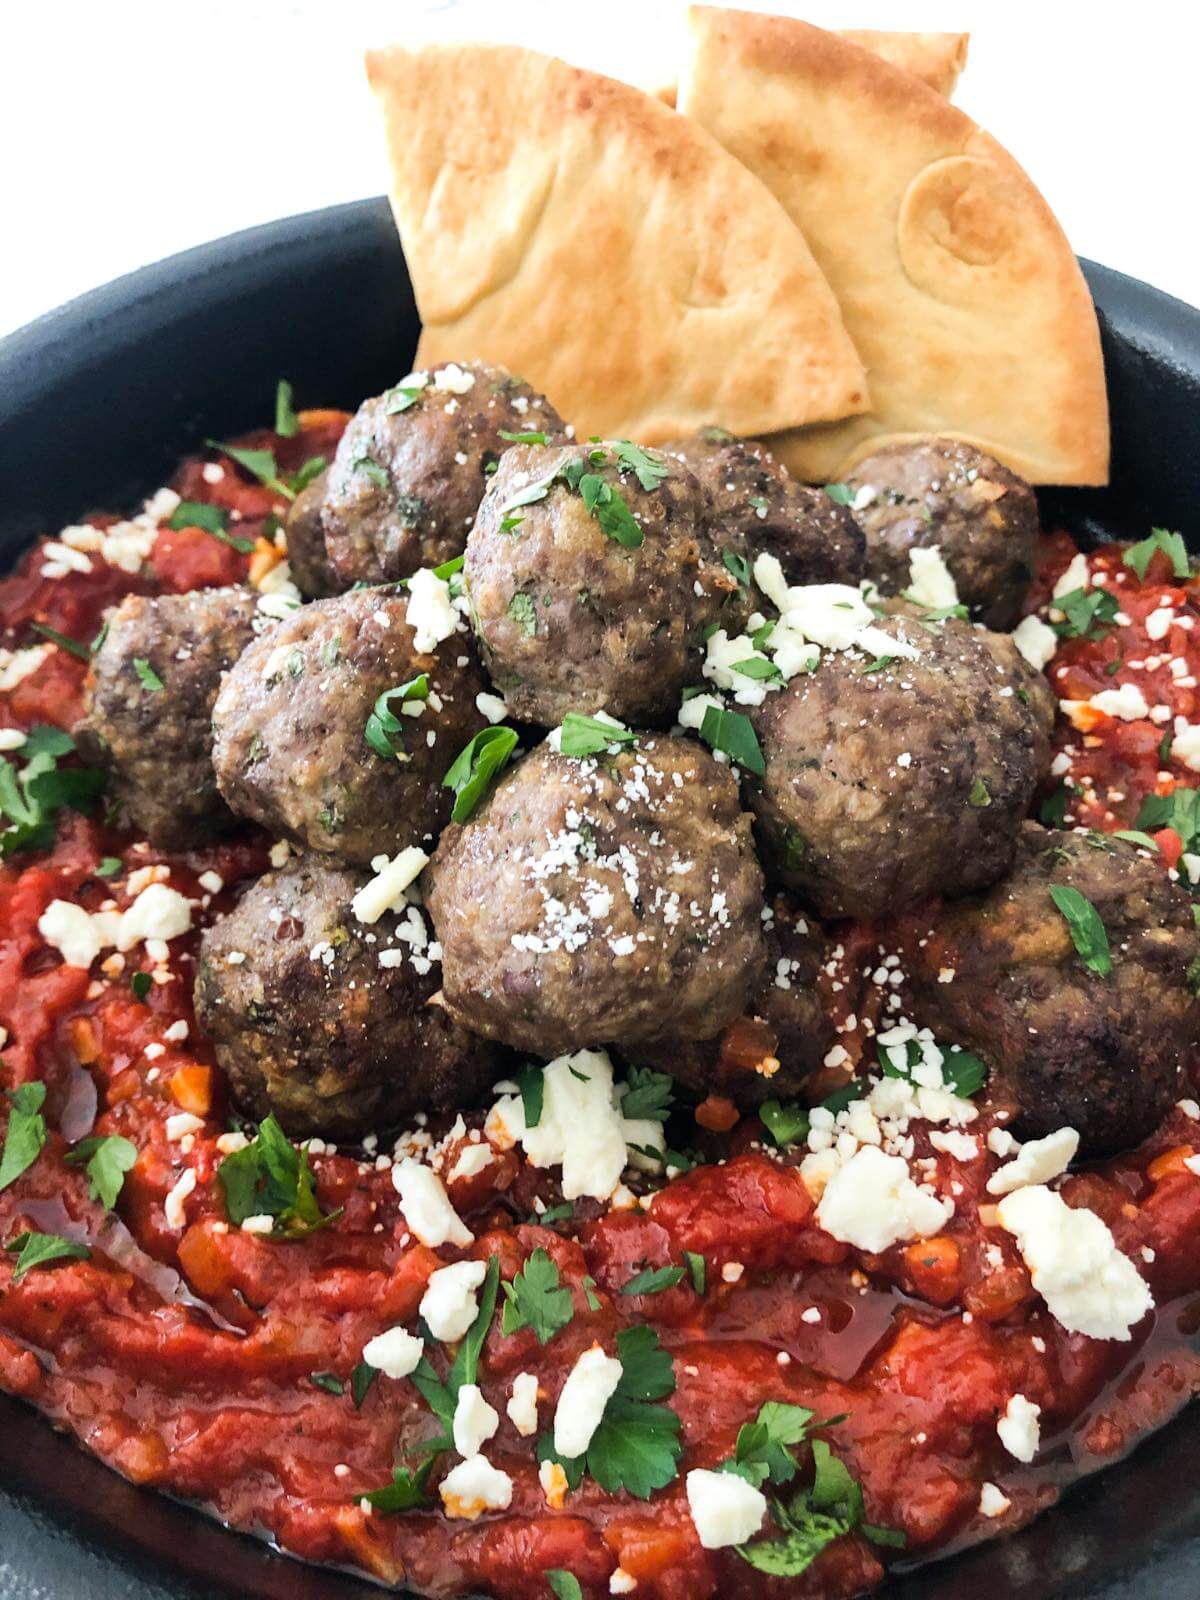 meatballs in tomato sauce with feta cheese and fresh basil.